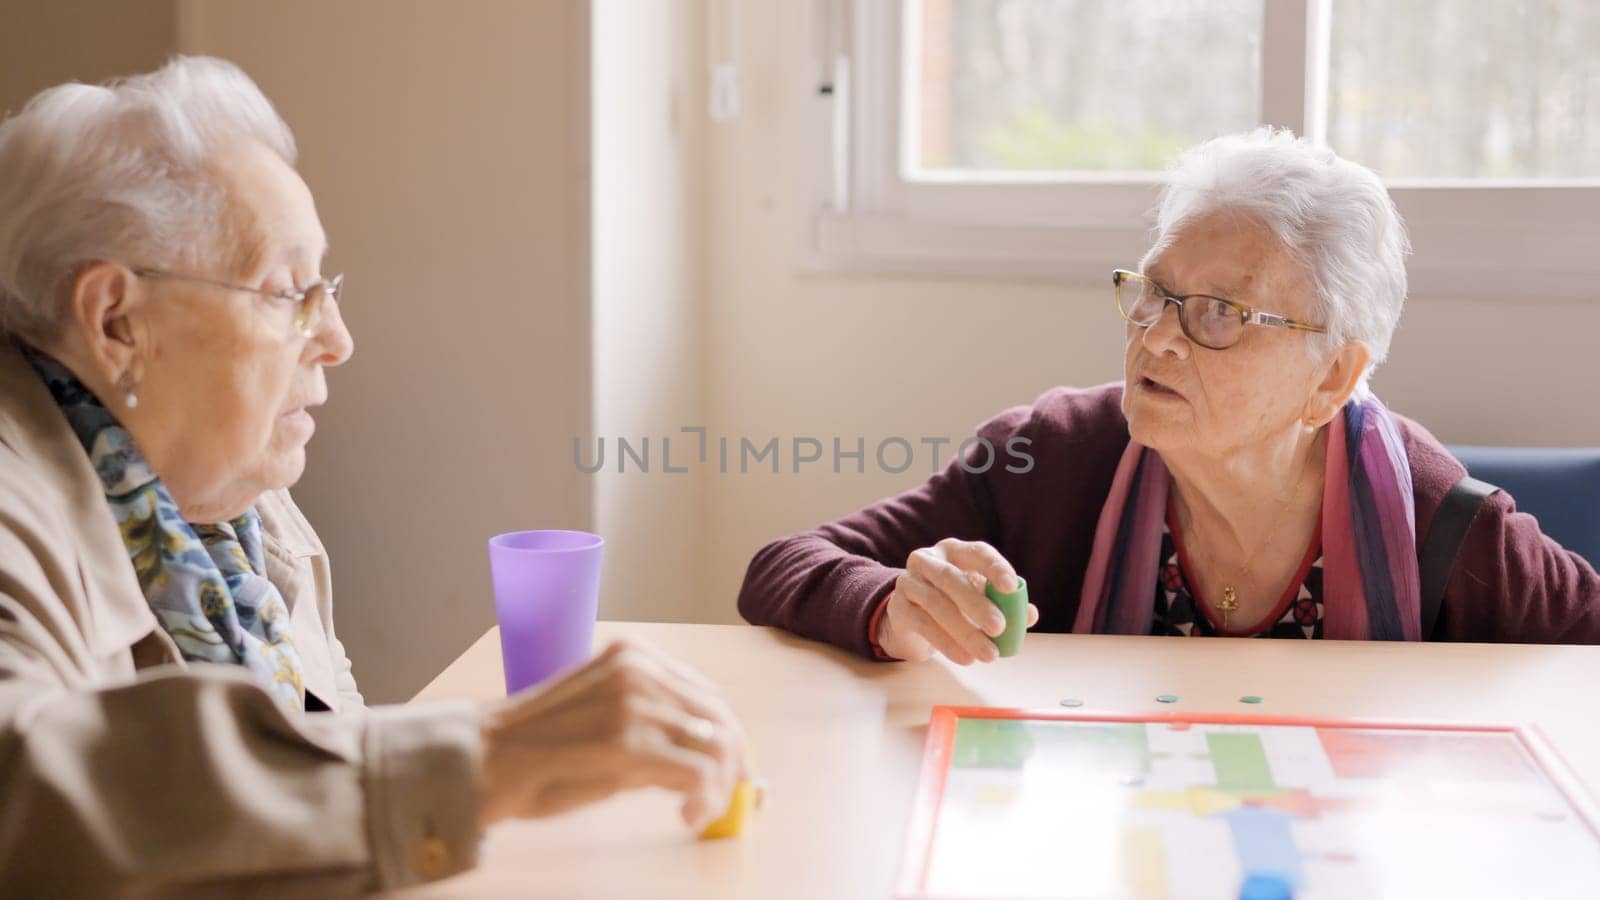 Two old friends having fun playing Parcheesi board game in a geriatric